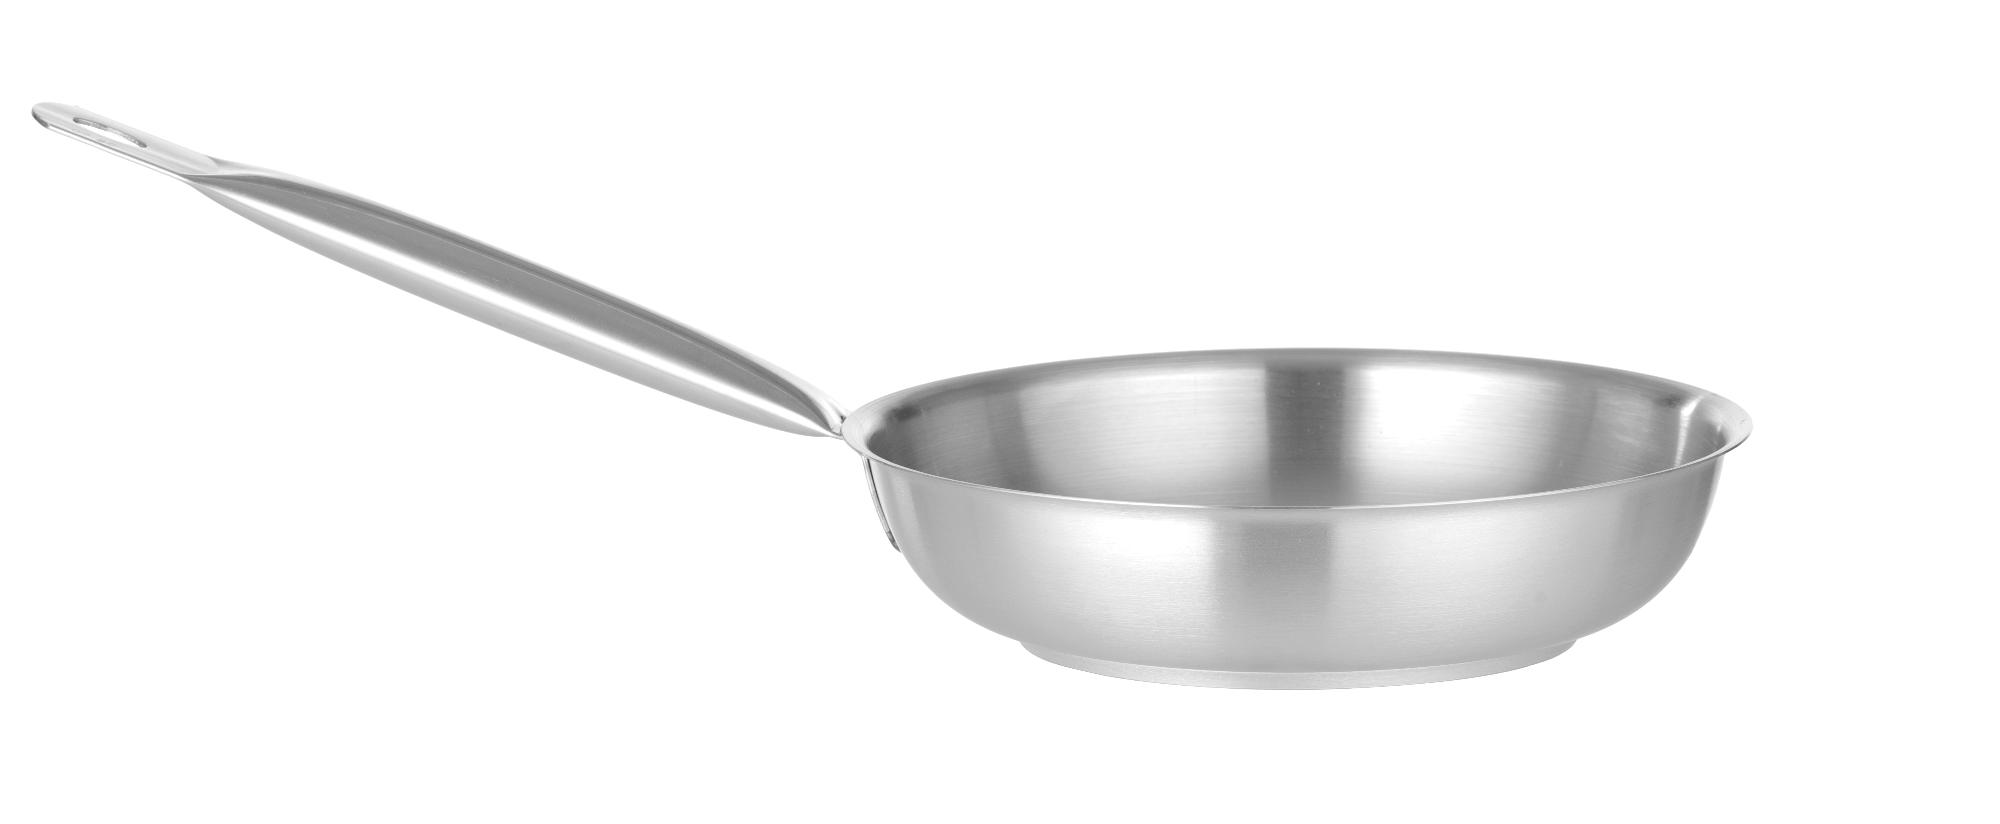 Stainless steel frying pan, 400mm